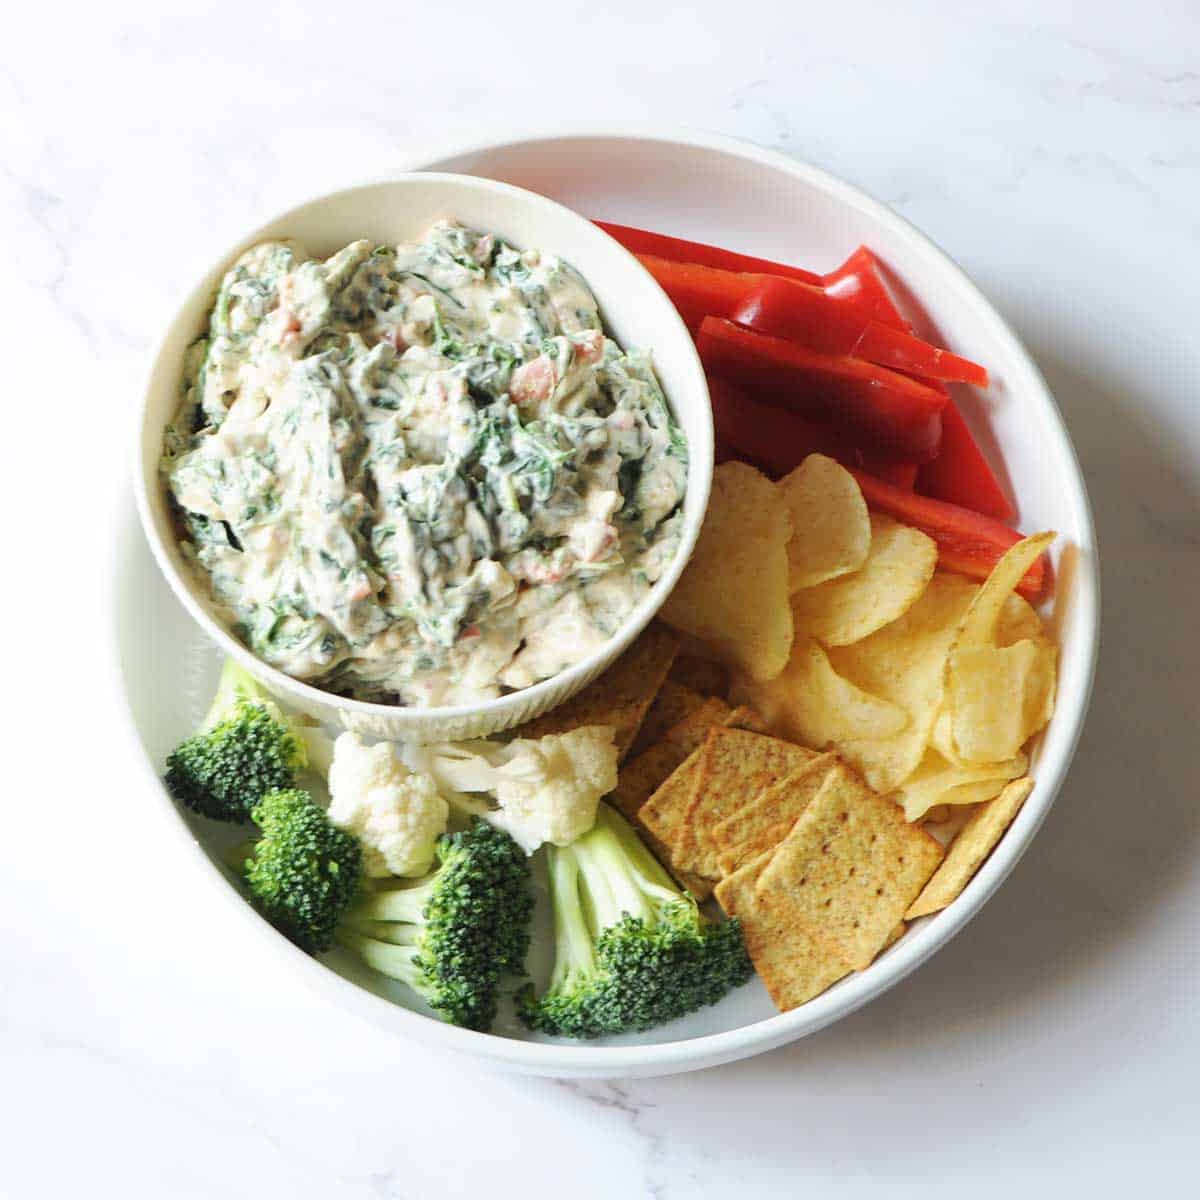 Lipton Spinach Dip surrounded by crackers, chips, and vegetables